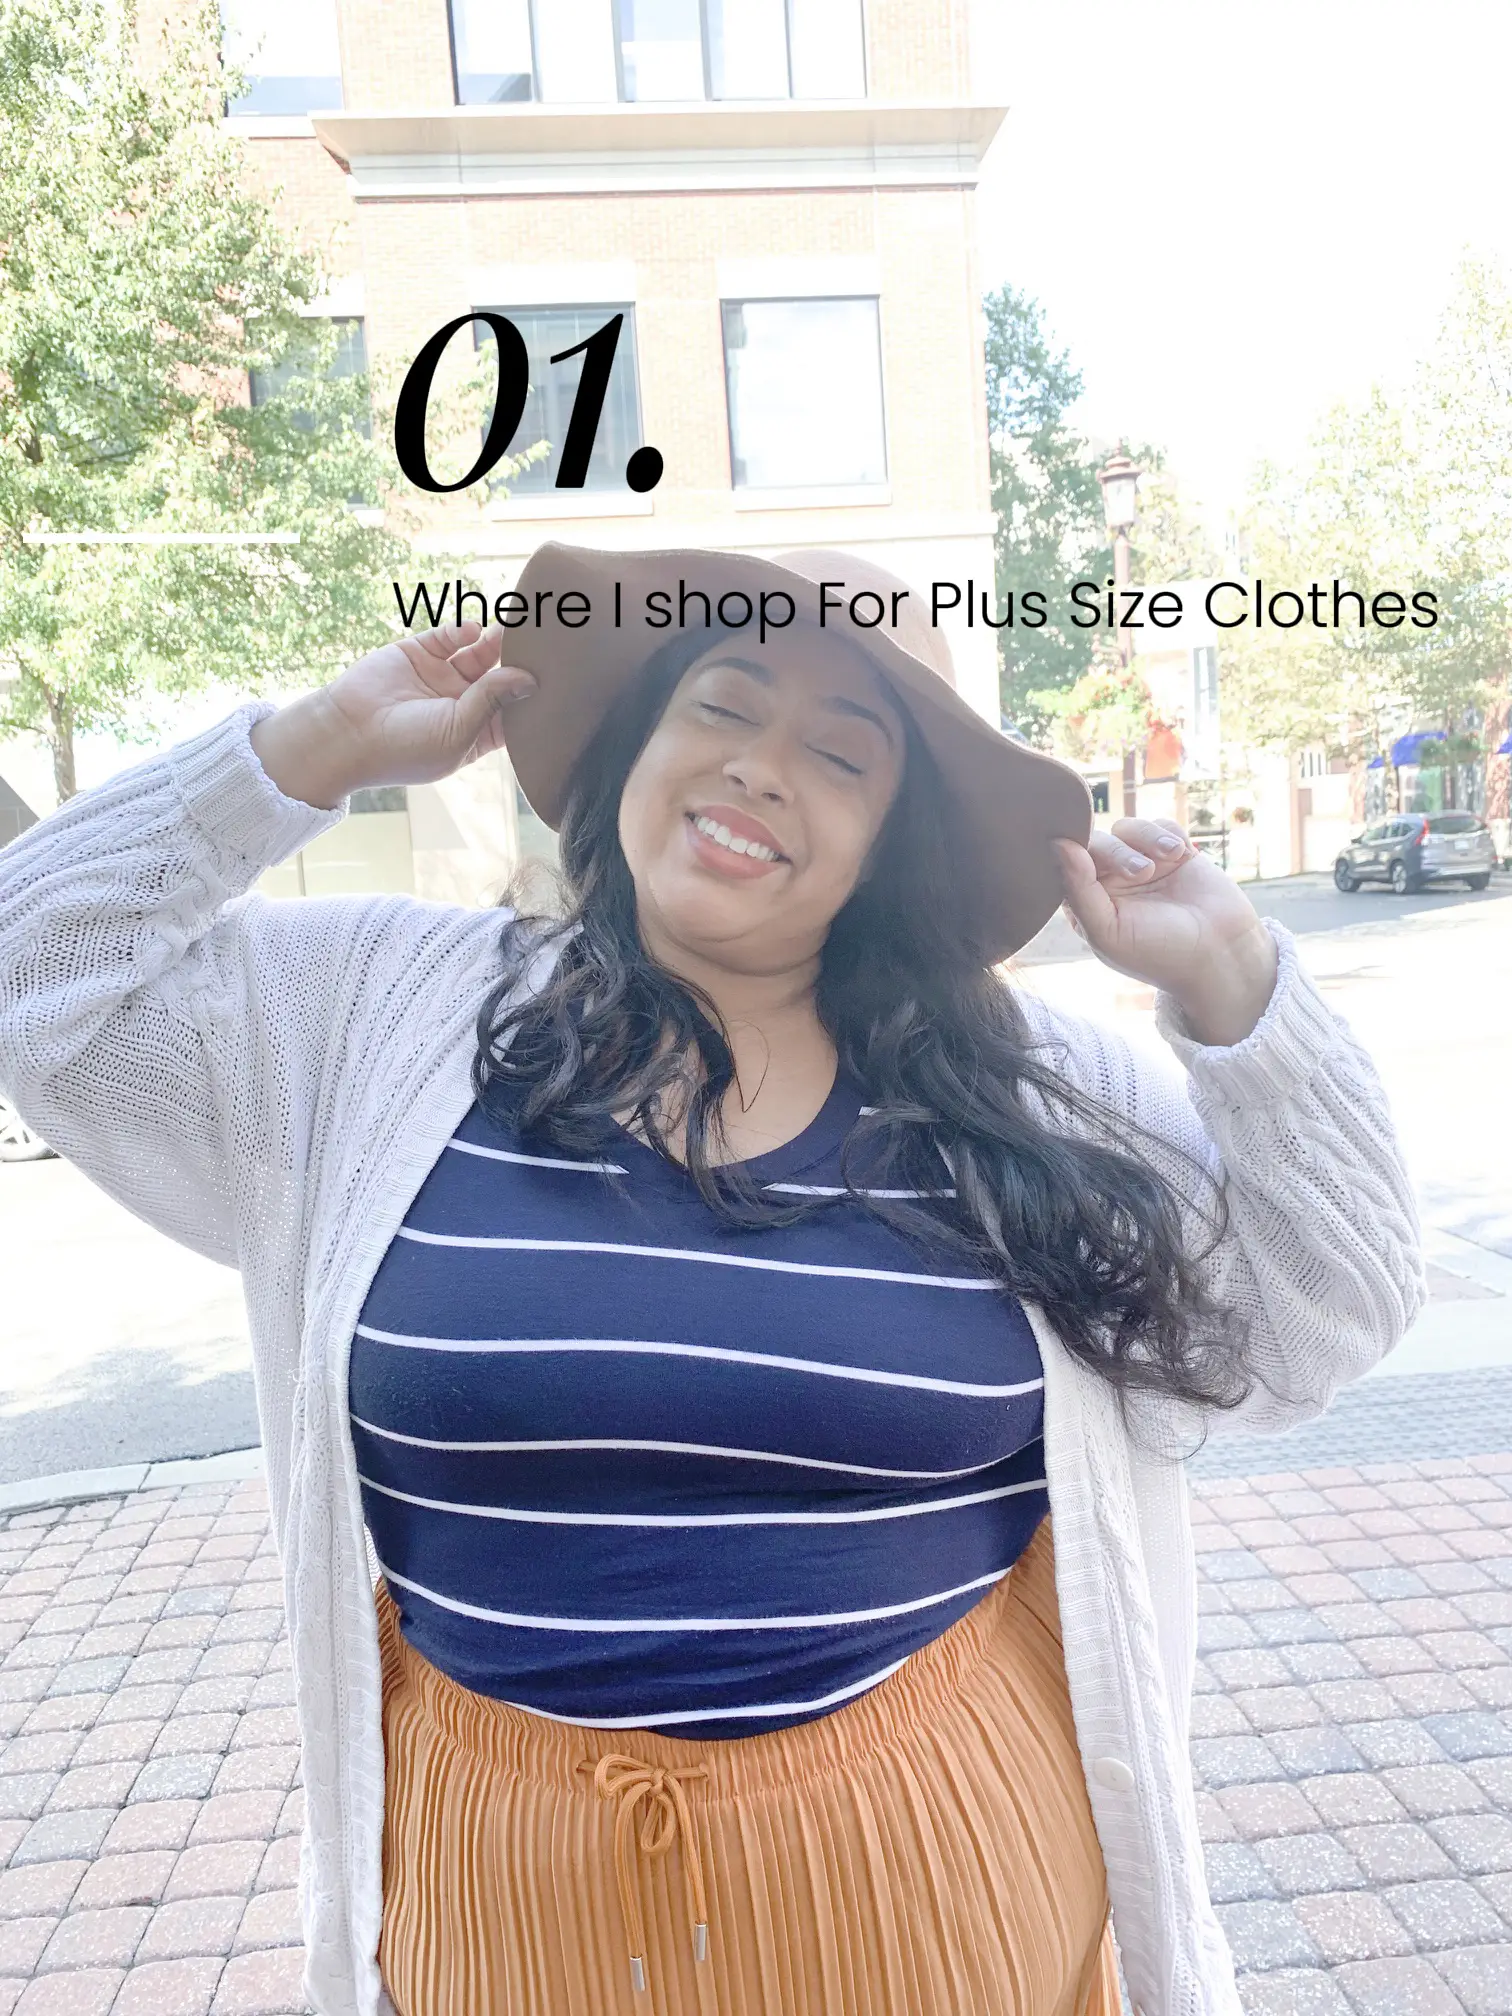 MASSIVE BOOHOO PLUS SIZE TRY ON HAUL, size 22 and 24, NOT SPONSORED